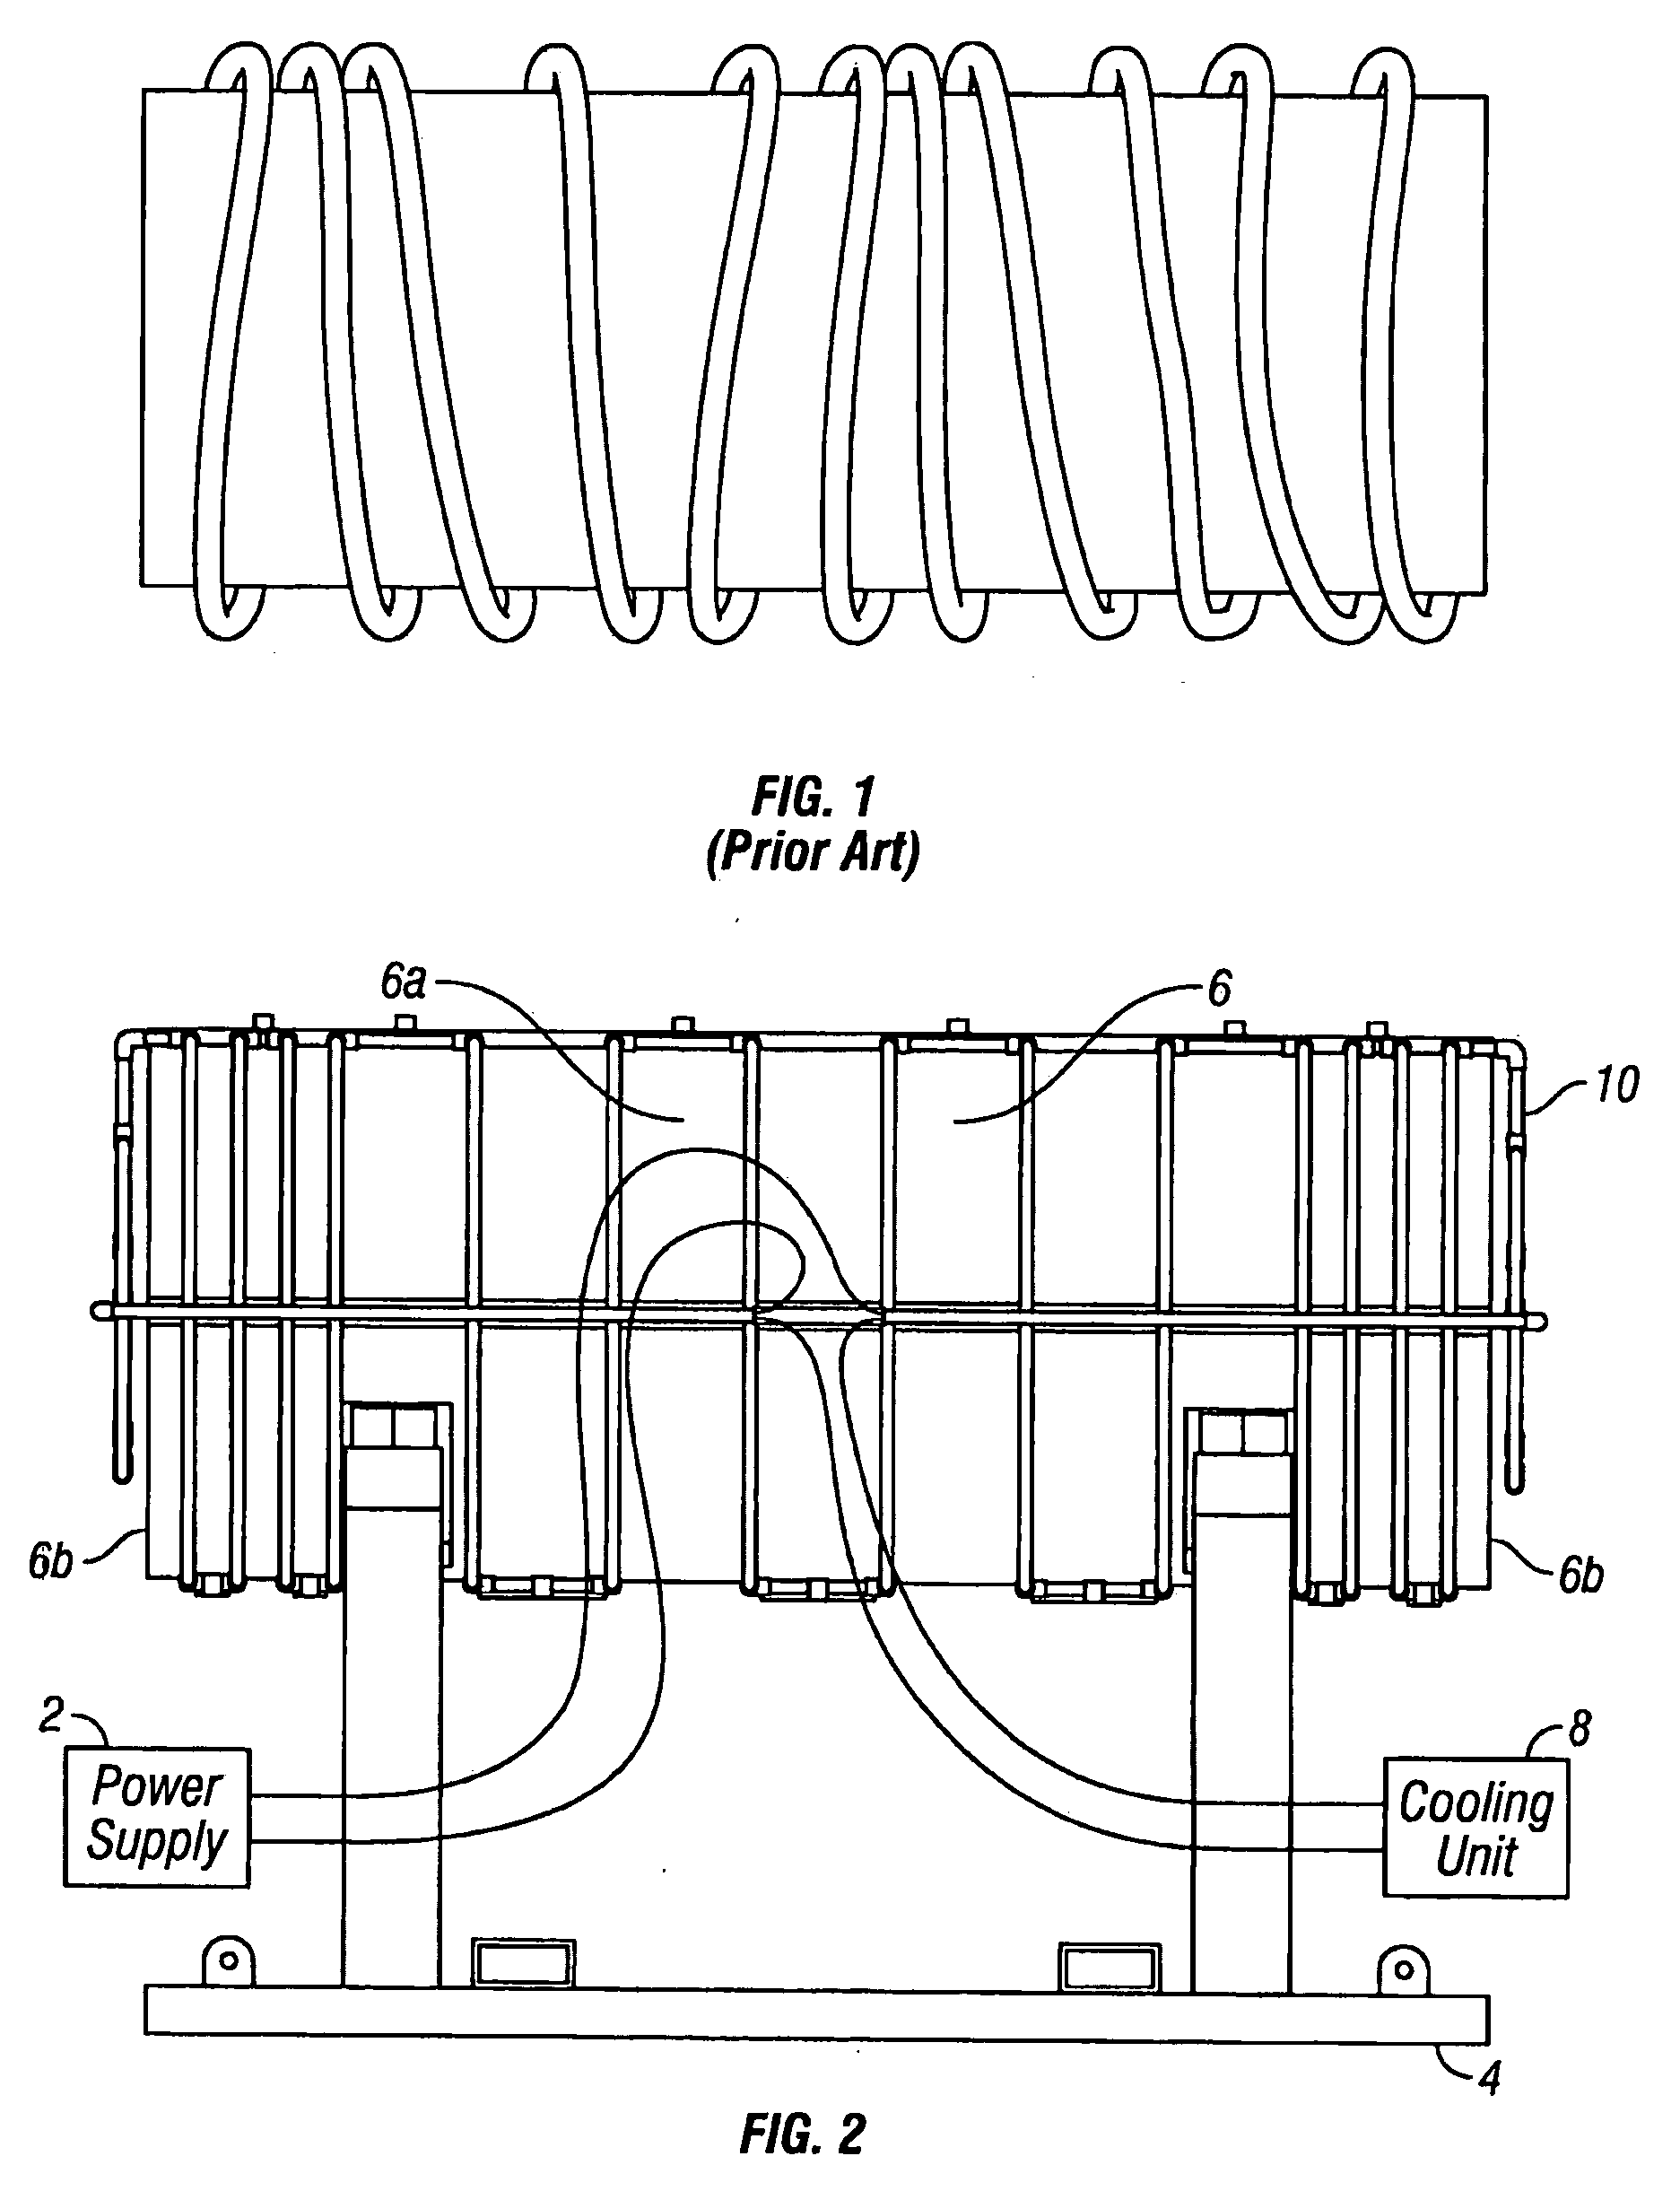 Inductive heating of workpiece using coiled assemblies, system and method